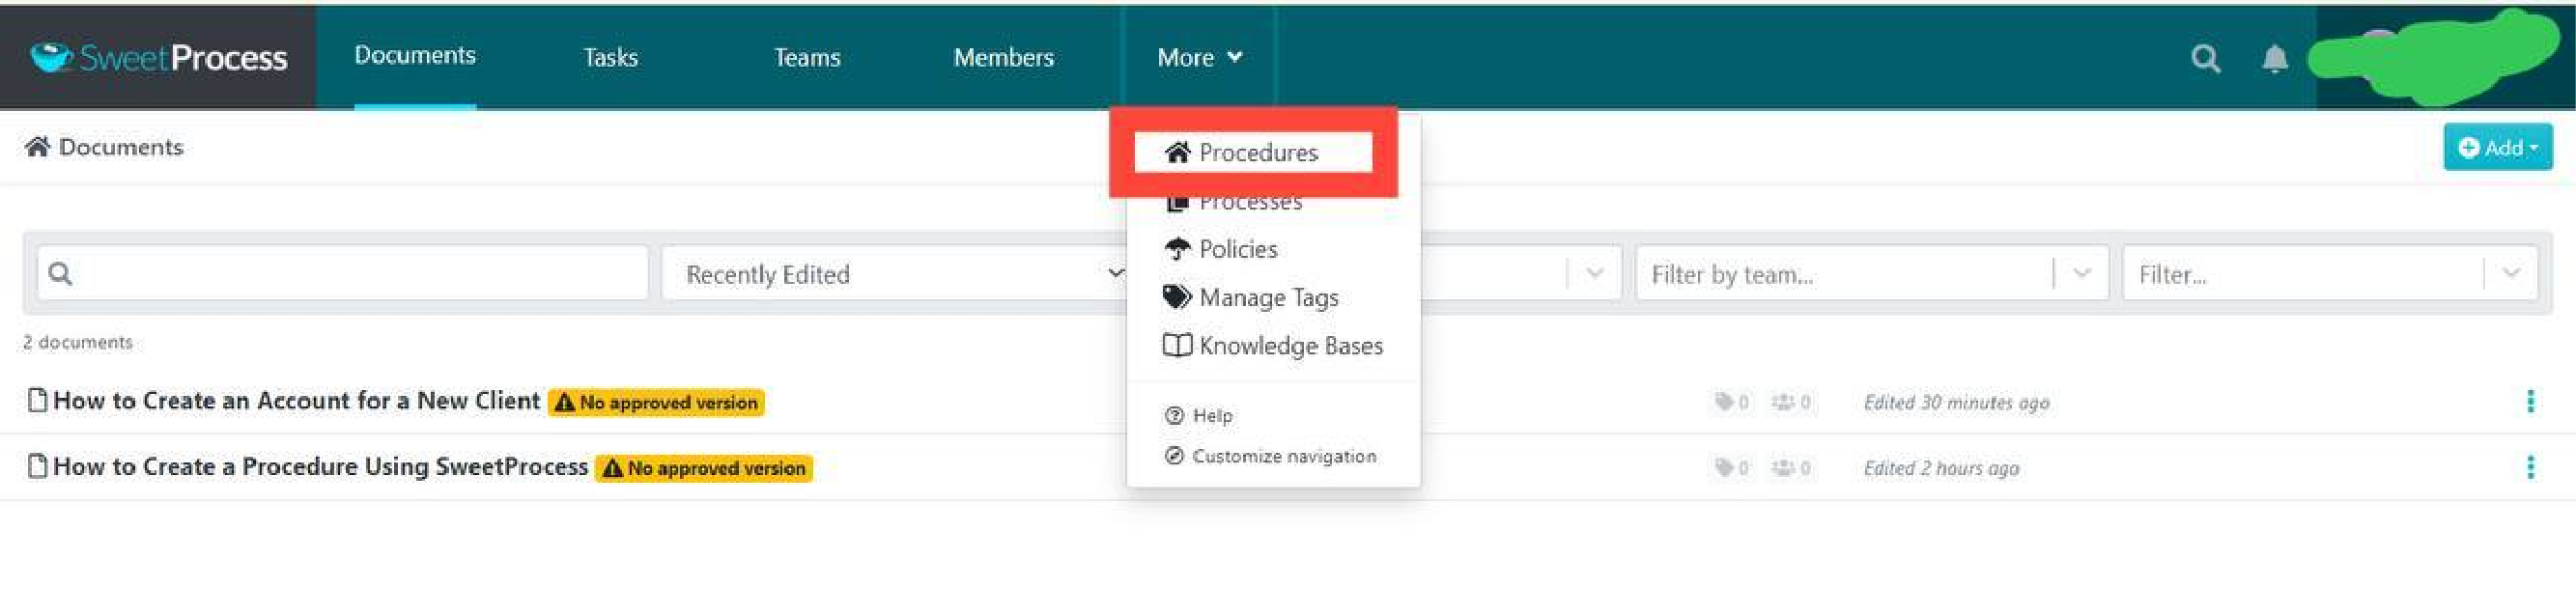 Access the "Procedures" tab at the top of your dashboard to view your list of procedures.